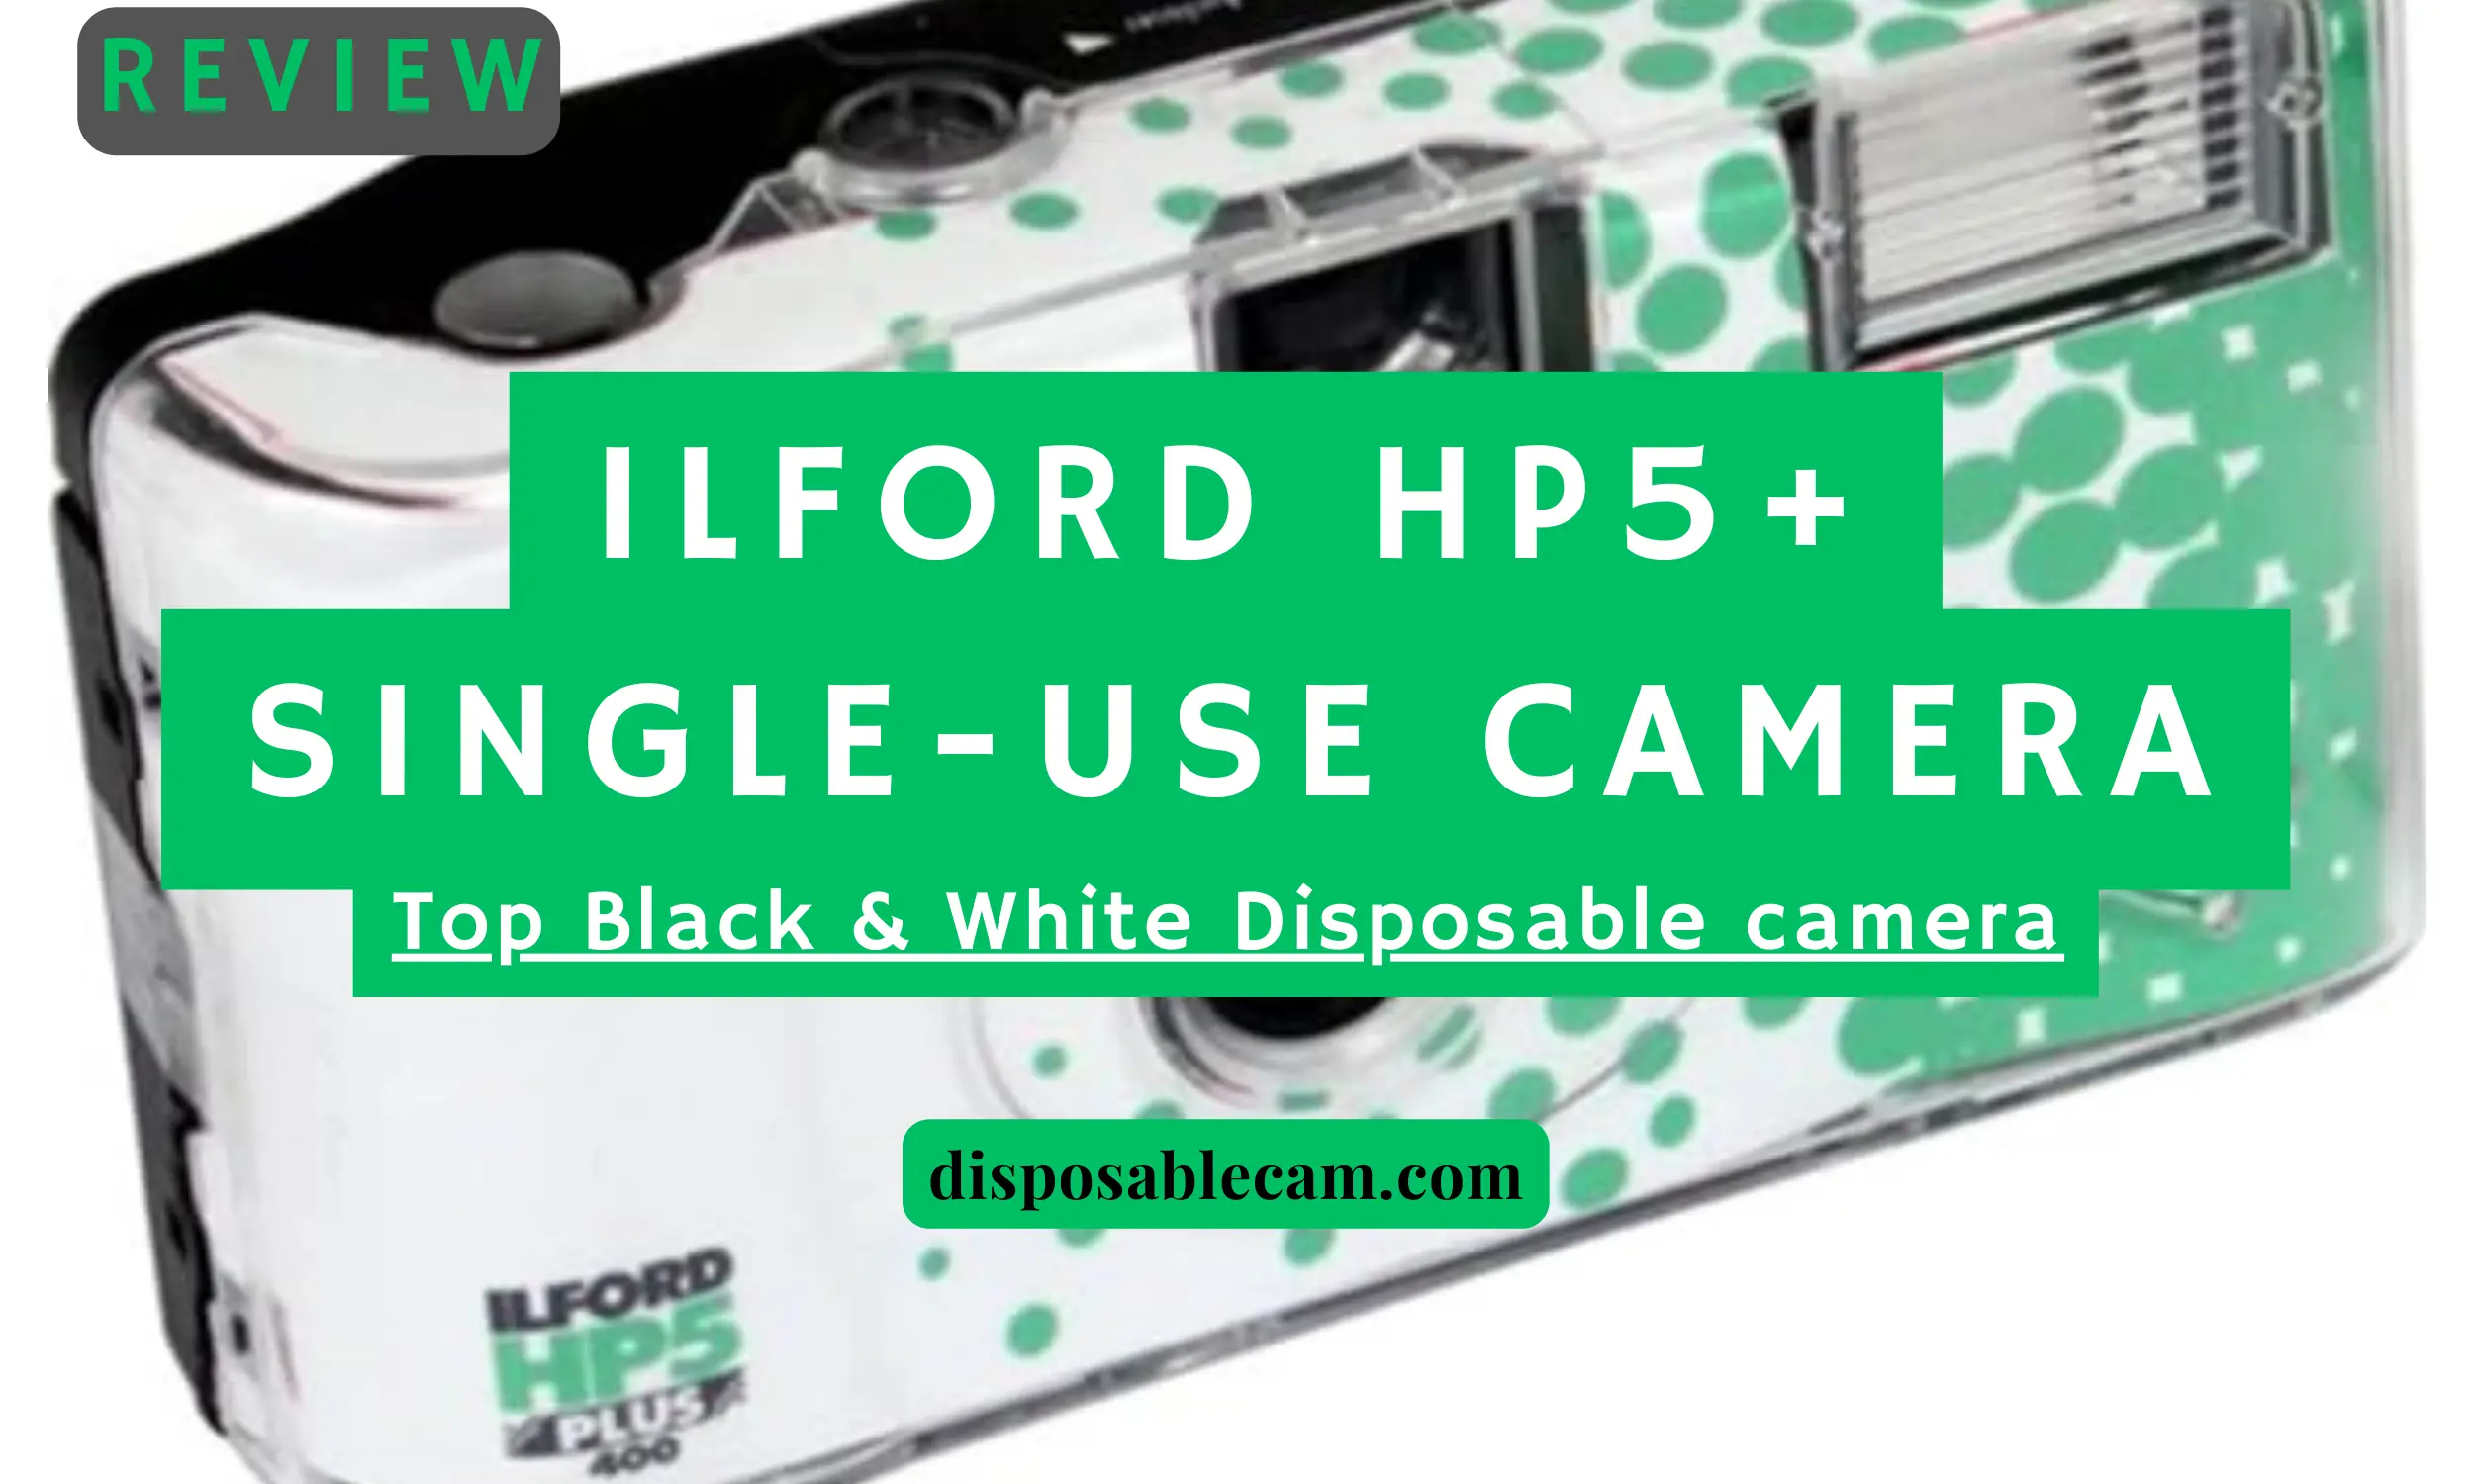 Ilford HP5 Plus single-use camera. The best black and white disposable camera